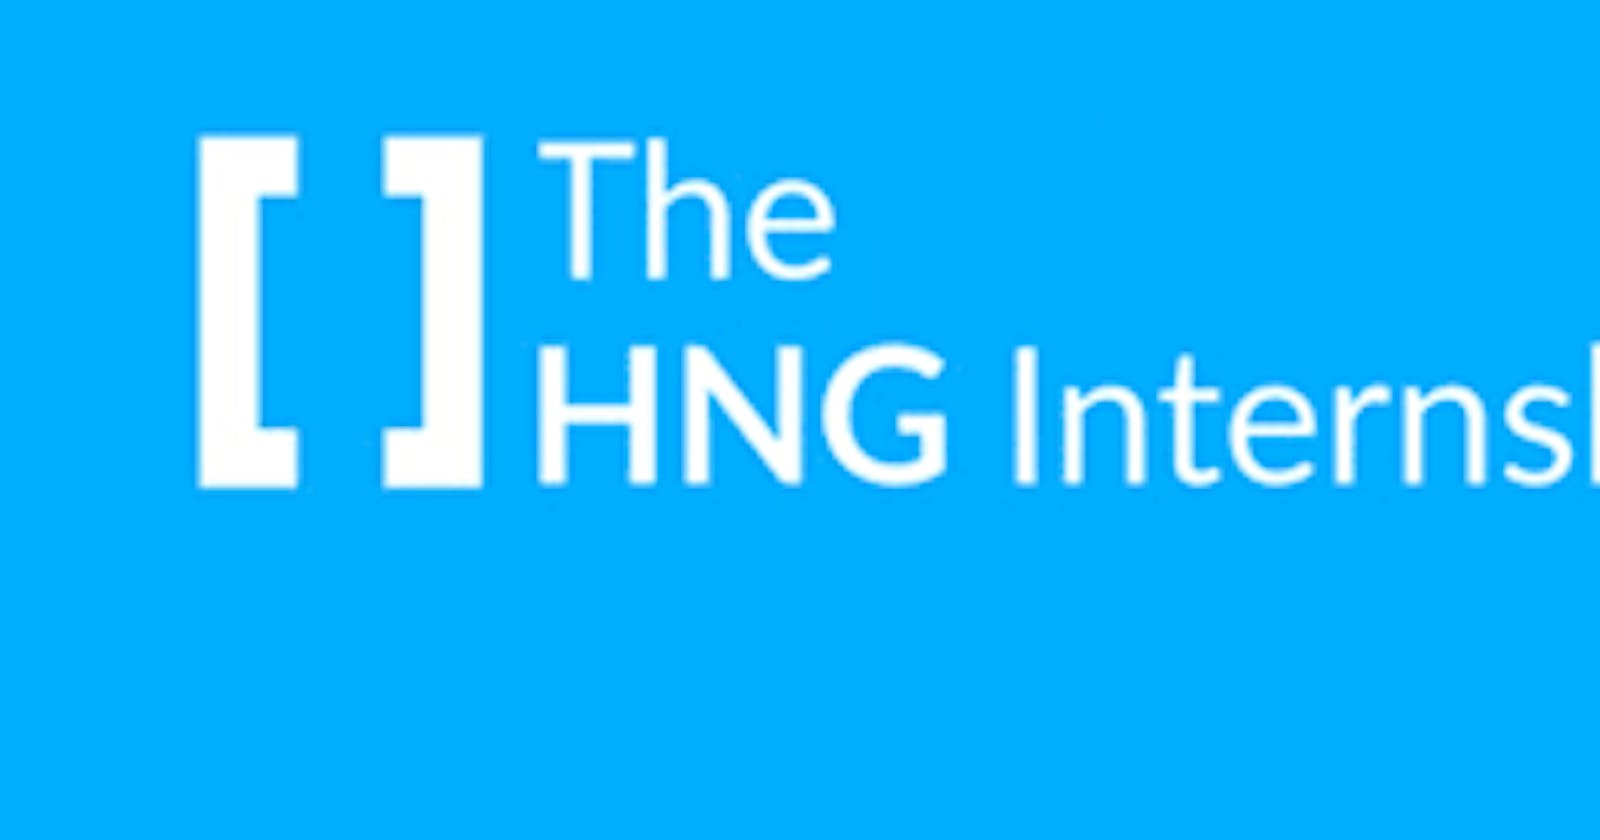 Why I joined HNG Remote Internship Program